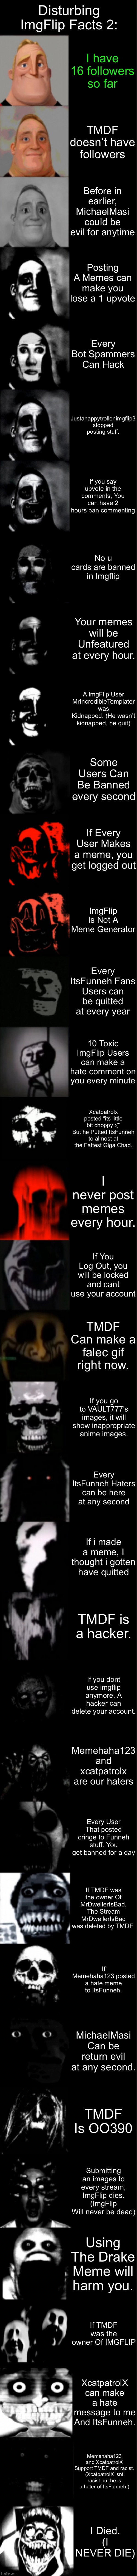 Disturbing ImgFlip Facts 2 | Disturbing ImgFlip Facts 2:; I have 16 followers so far; TMDF doesn’t have followers; Before in earlier, MichaelMasi could be evil for anytime; Posting A Memes can make you lose a 1 upvote; Every Bot Spammers Can Hack; Justahappytrollonimgflip3 stopped posting stuff. If you say upvote in the comments, You can have 2 hours ban commenting; No u cards are banned in Imgflip; Your memes will be Unfeatured at every hour. A ImgFlip User MrIncredibleTemplater was Kidnapped. (He wasn’t kidnapped, he quit); Some Users Can Be Banned every second; If Every User Makes a meme, you get logged out; ImgFlip Is Not A Meme Generator; Every ItsFunneh Fans Users can be quitted at every year; 10 Toxic ImgFlip Users can make a hate comment on you every minute; Xcatpatrolx posted “its little bit choppy :(“ But he Putted ItsFunneh to almost at the Fattest Giga Chad. I never post memes every hour. If You Log Out, you will be locked and cant use your account; TMDF Can make a falec gif right now. If you go to VAULT777’s images, it will show inappropriate anime images. Every ItsFunneh Haters can be here at any second; If i made a meme, I thought i gotten have quitted; TMDF is a hacker. If you dont use imgflip anymore, A hacker can delete your account. Memehaha123 and xcatpatrolx are our haters; Every User That posted cringe to Funneh stuff. You get banned for a day; If TMDF was the owner Of MrDwellerIsBad, The Stream MrDwellerIsBad was deleted by TMDF; If Memehaha123 posted a hate meme to ItsFunneh. MichaelMasi Can be return evil at any second. TMDF Is OO390; Submitting an images to every stream, ImgFlip dies. (ImgFlip Will never be dead); Using The Drake Meme will harm you. If TMDF was the owner Of IMGFLIP; XcatpatrolX can make a hate message to me And ItsFunneh. Memehaha123 and XcatpatrolX Support TMDF and racist. (XcatpatrolX isnt racist but he is a hater of ItsFunneh.); I Died. (I NEVER DIE) | image tagged in mr incredible becoming uncanny super extended hd | made w/ Imgflip meme maker